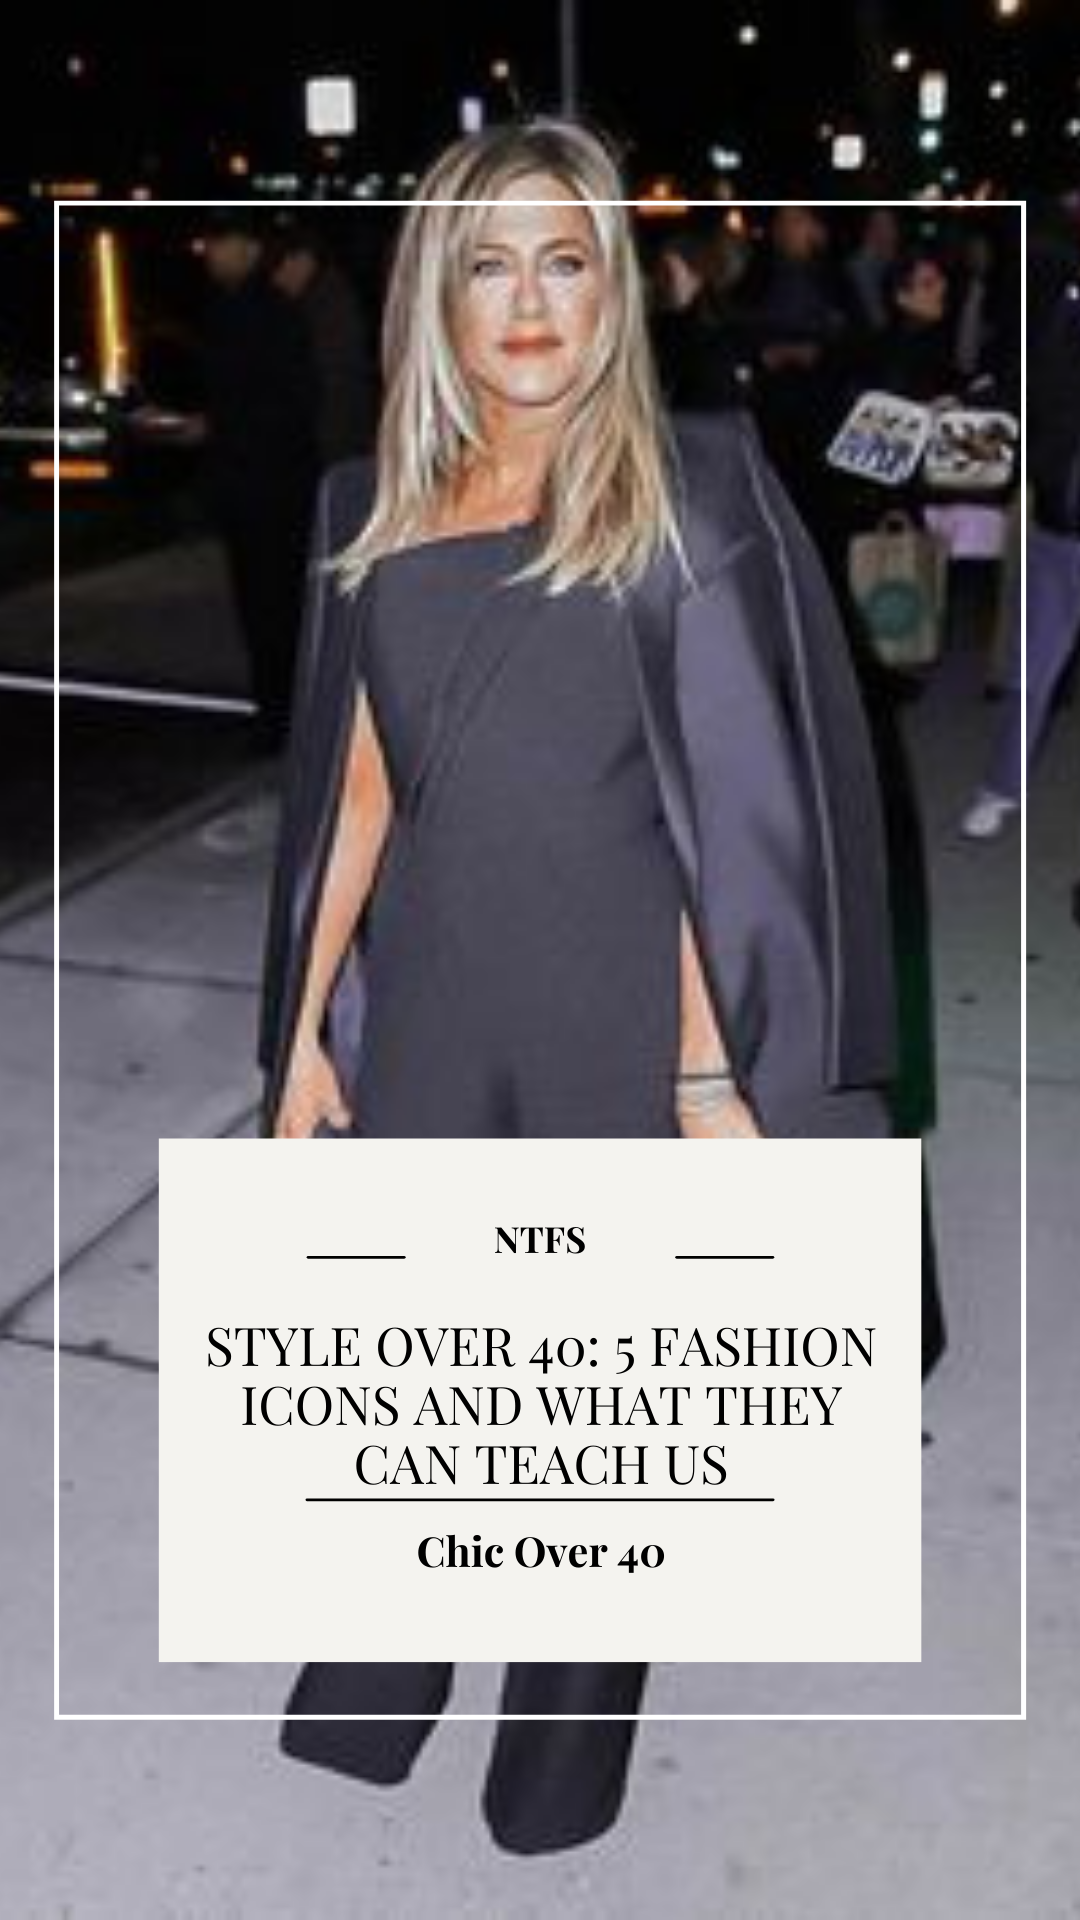 Style over 40: 5 Fashion Icons and What We Can Learn